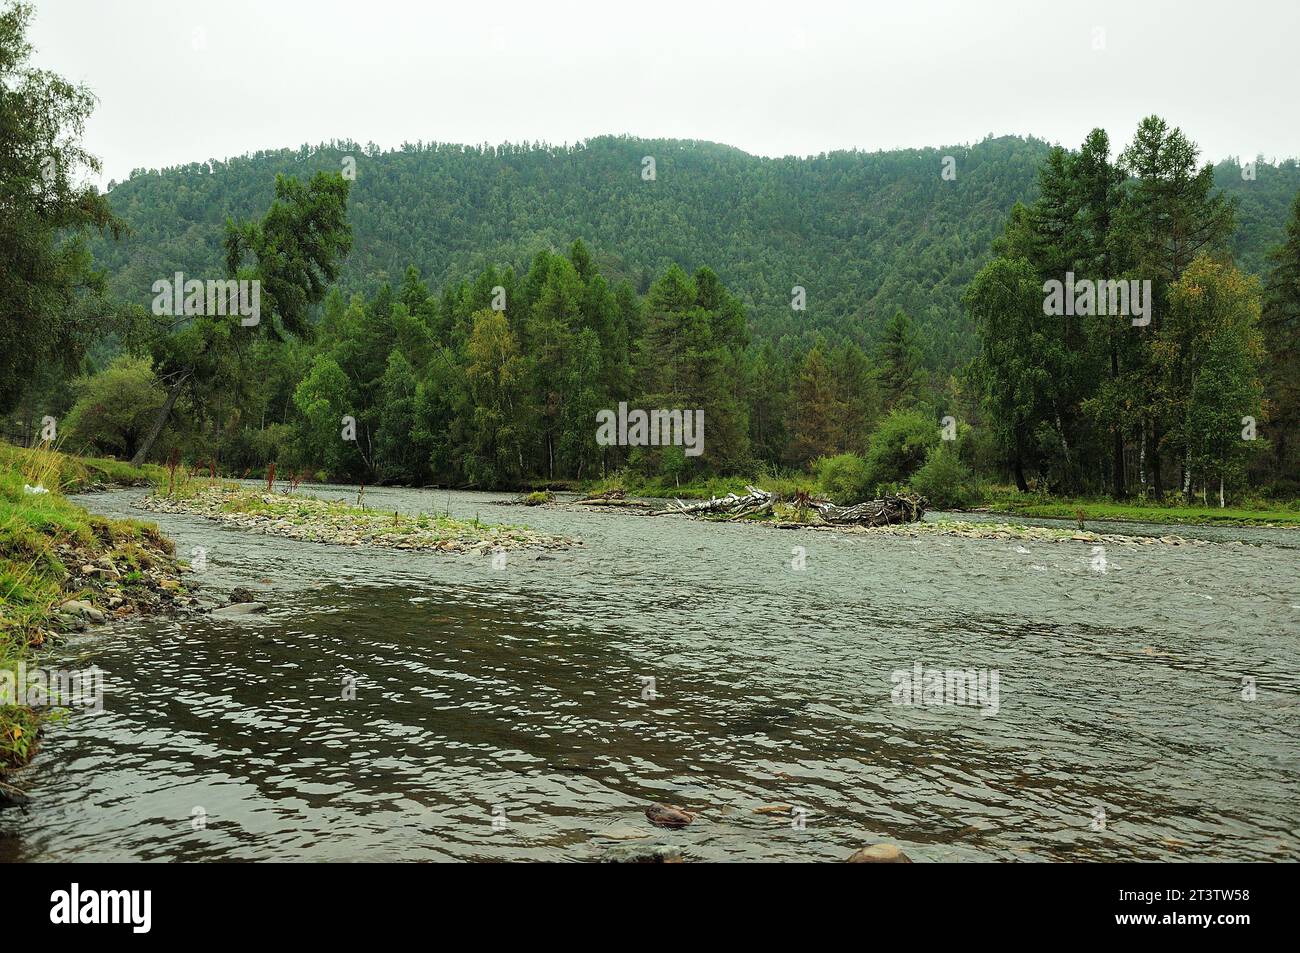 Stone islands in the middle of the channel of a small river flowing through a dense forest at the foot of high mountains on a cloudy summer day. Sema Stock Photo